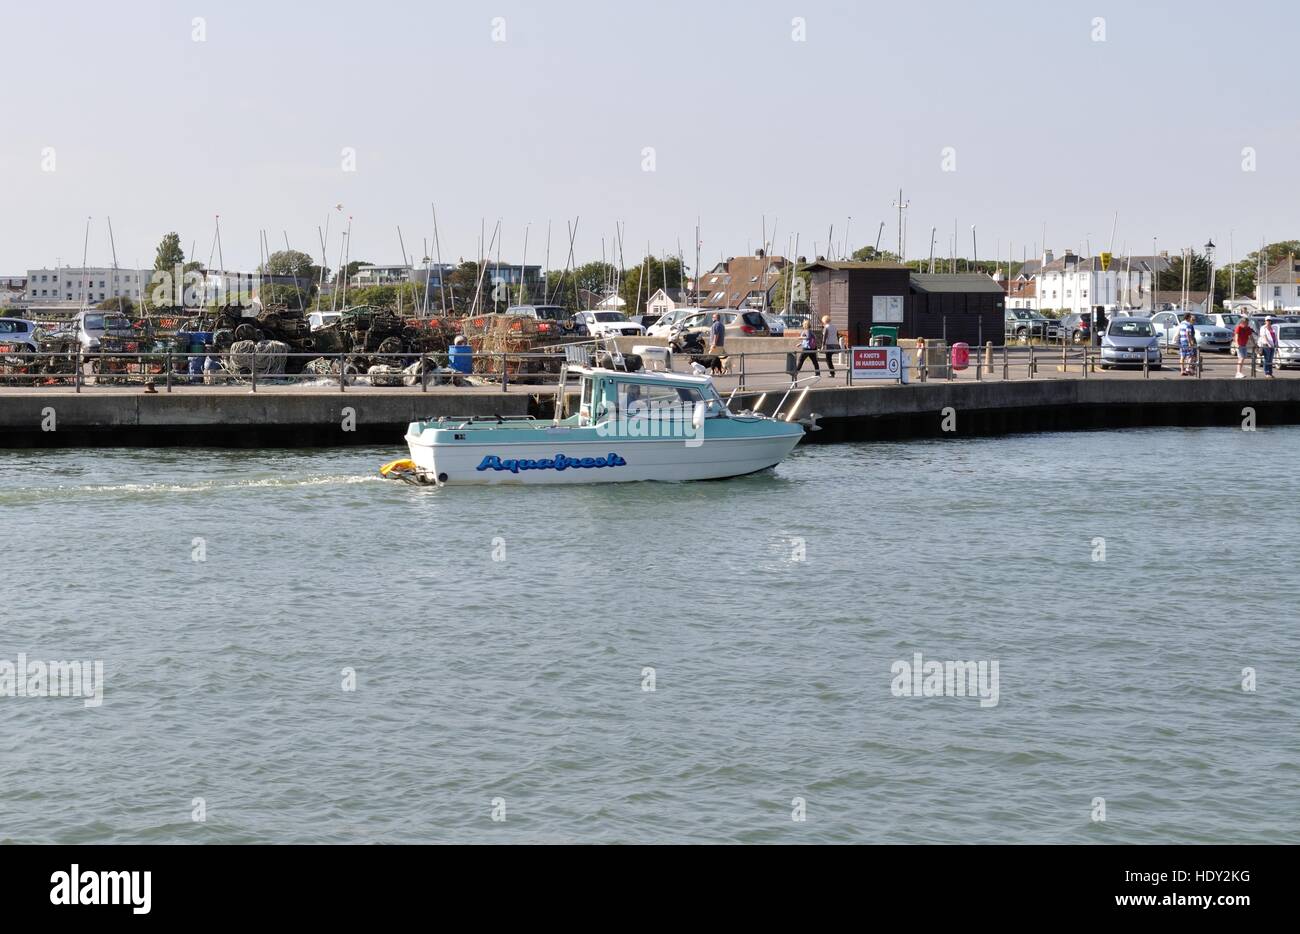 A small motor boat passes Mudeford Quay, Dorset, and heads out to sea.England Stock Photo